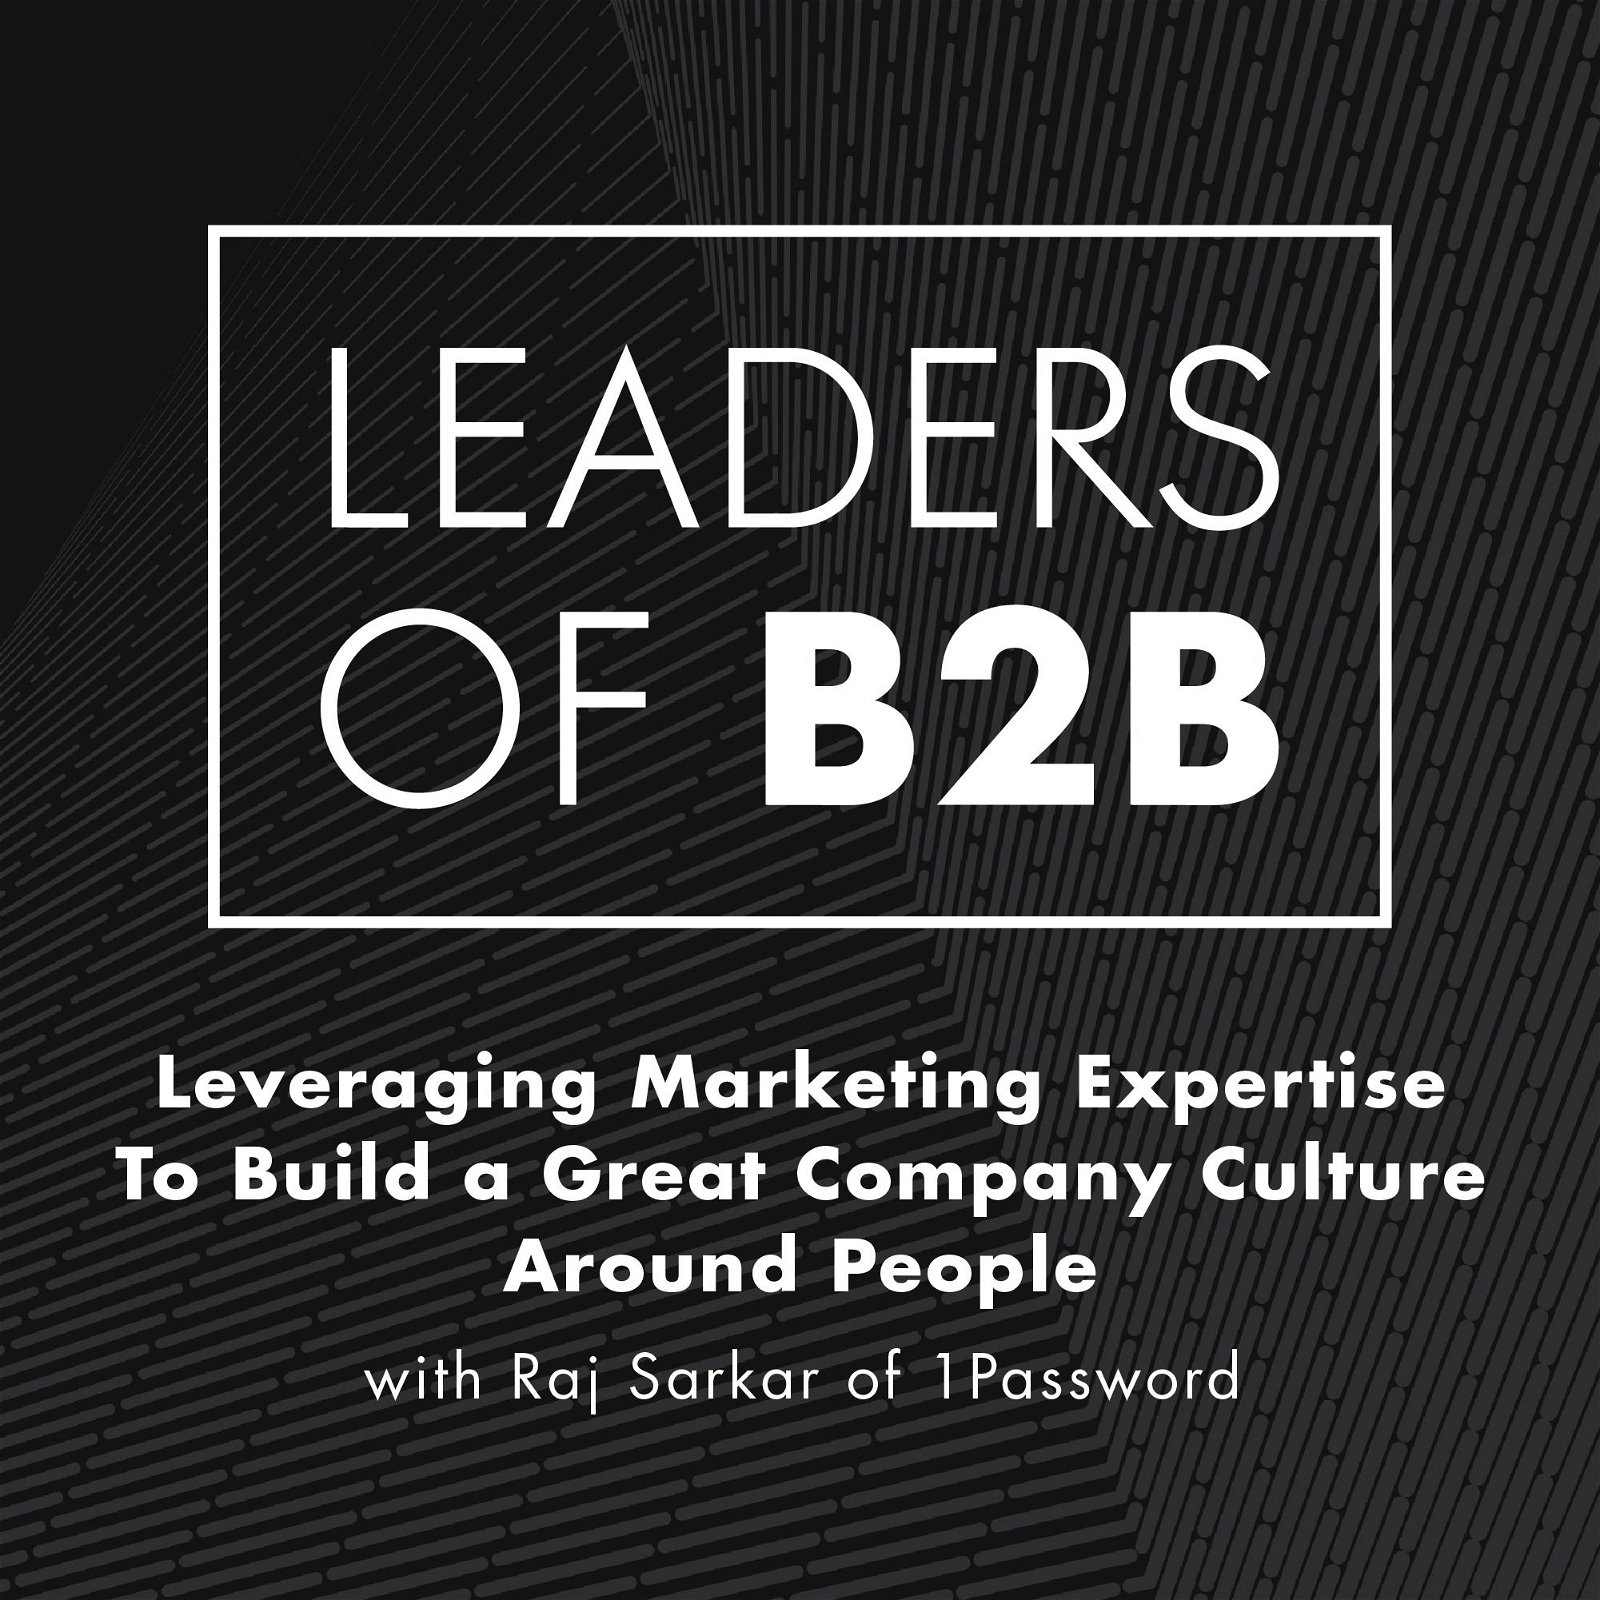 Leveraging Marketing Expertise To Build a Great Company Culture Around People with Raj Sarkar of 1Password